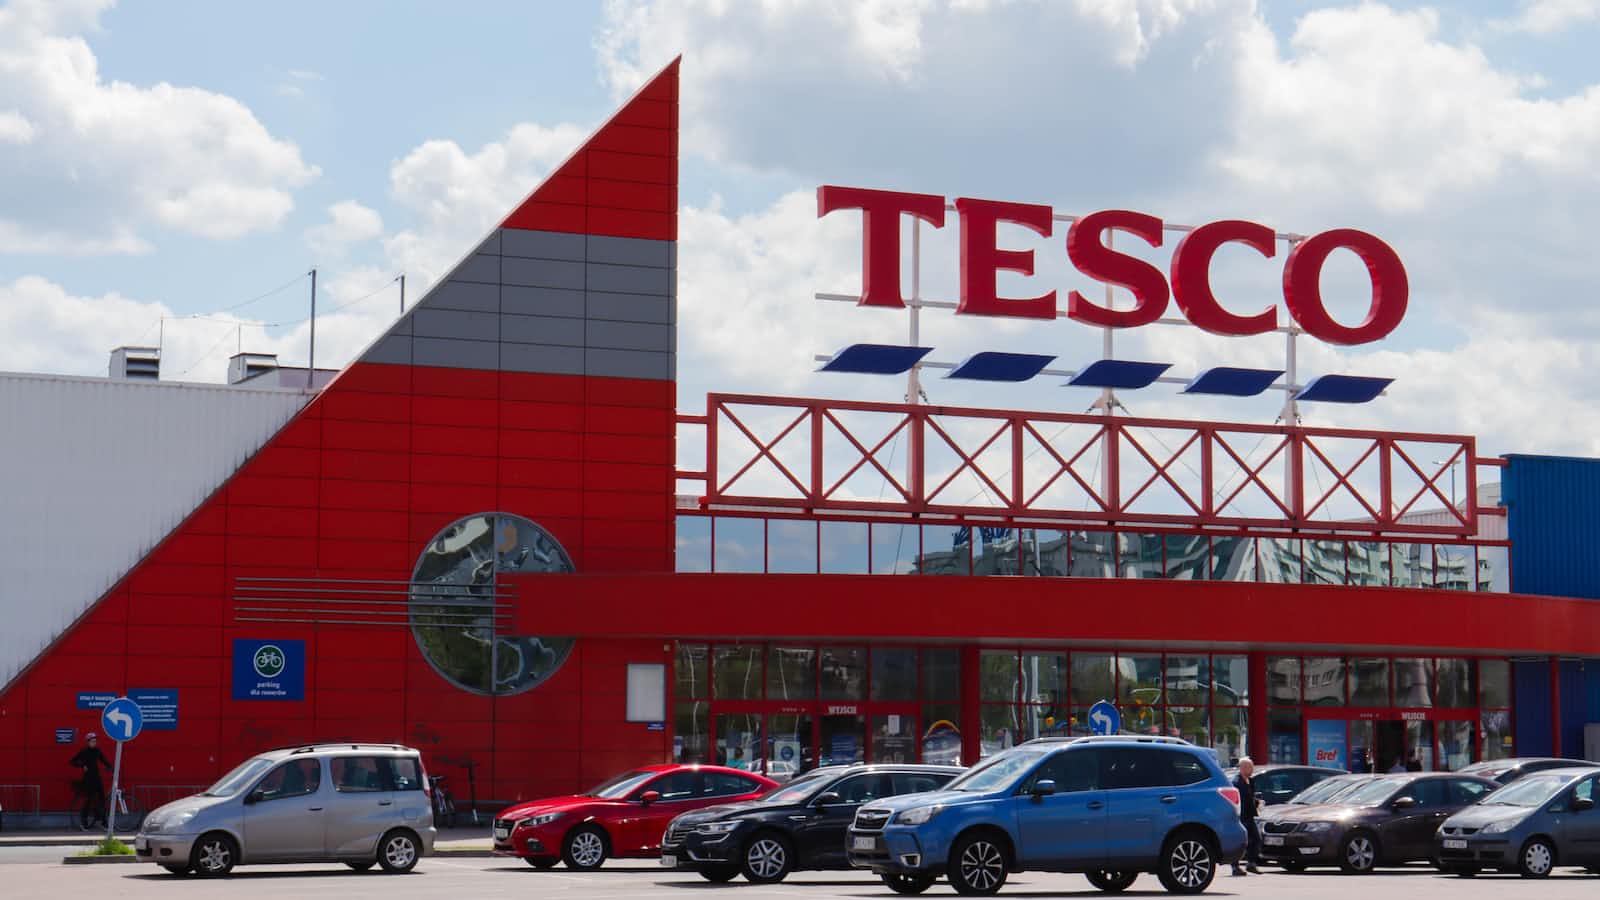 Tesco store with car park in foreground